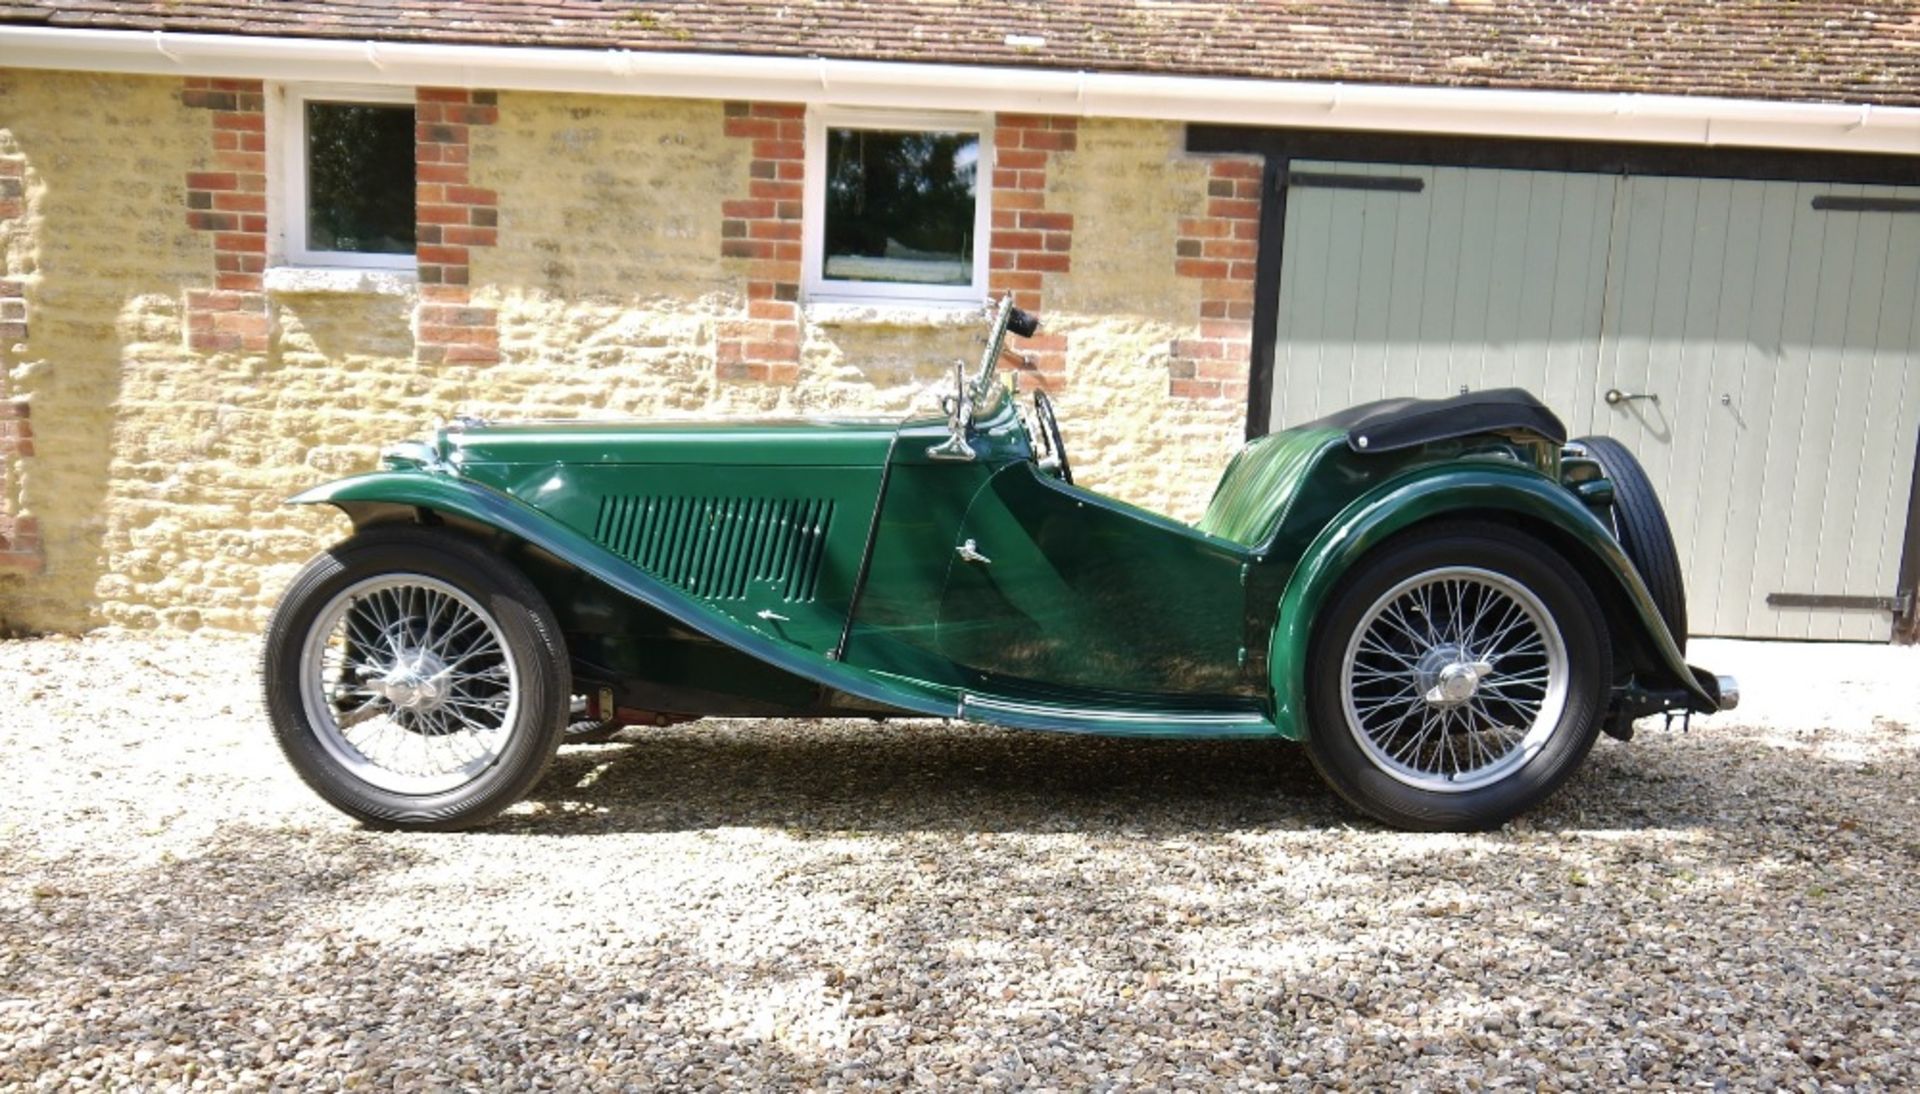 1949 MG TC 'MIDGET' Registration Number: XVV 276 Chassis number: TC 7712 Recorded Mileage: 40,700 - Image 4 of 21